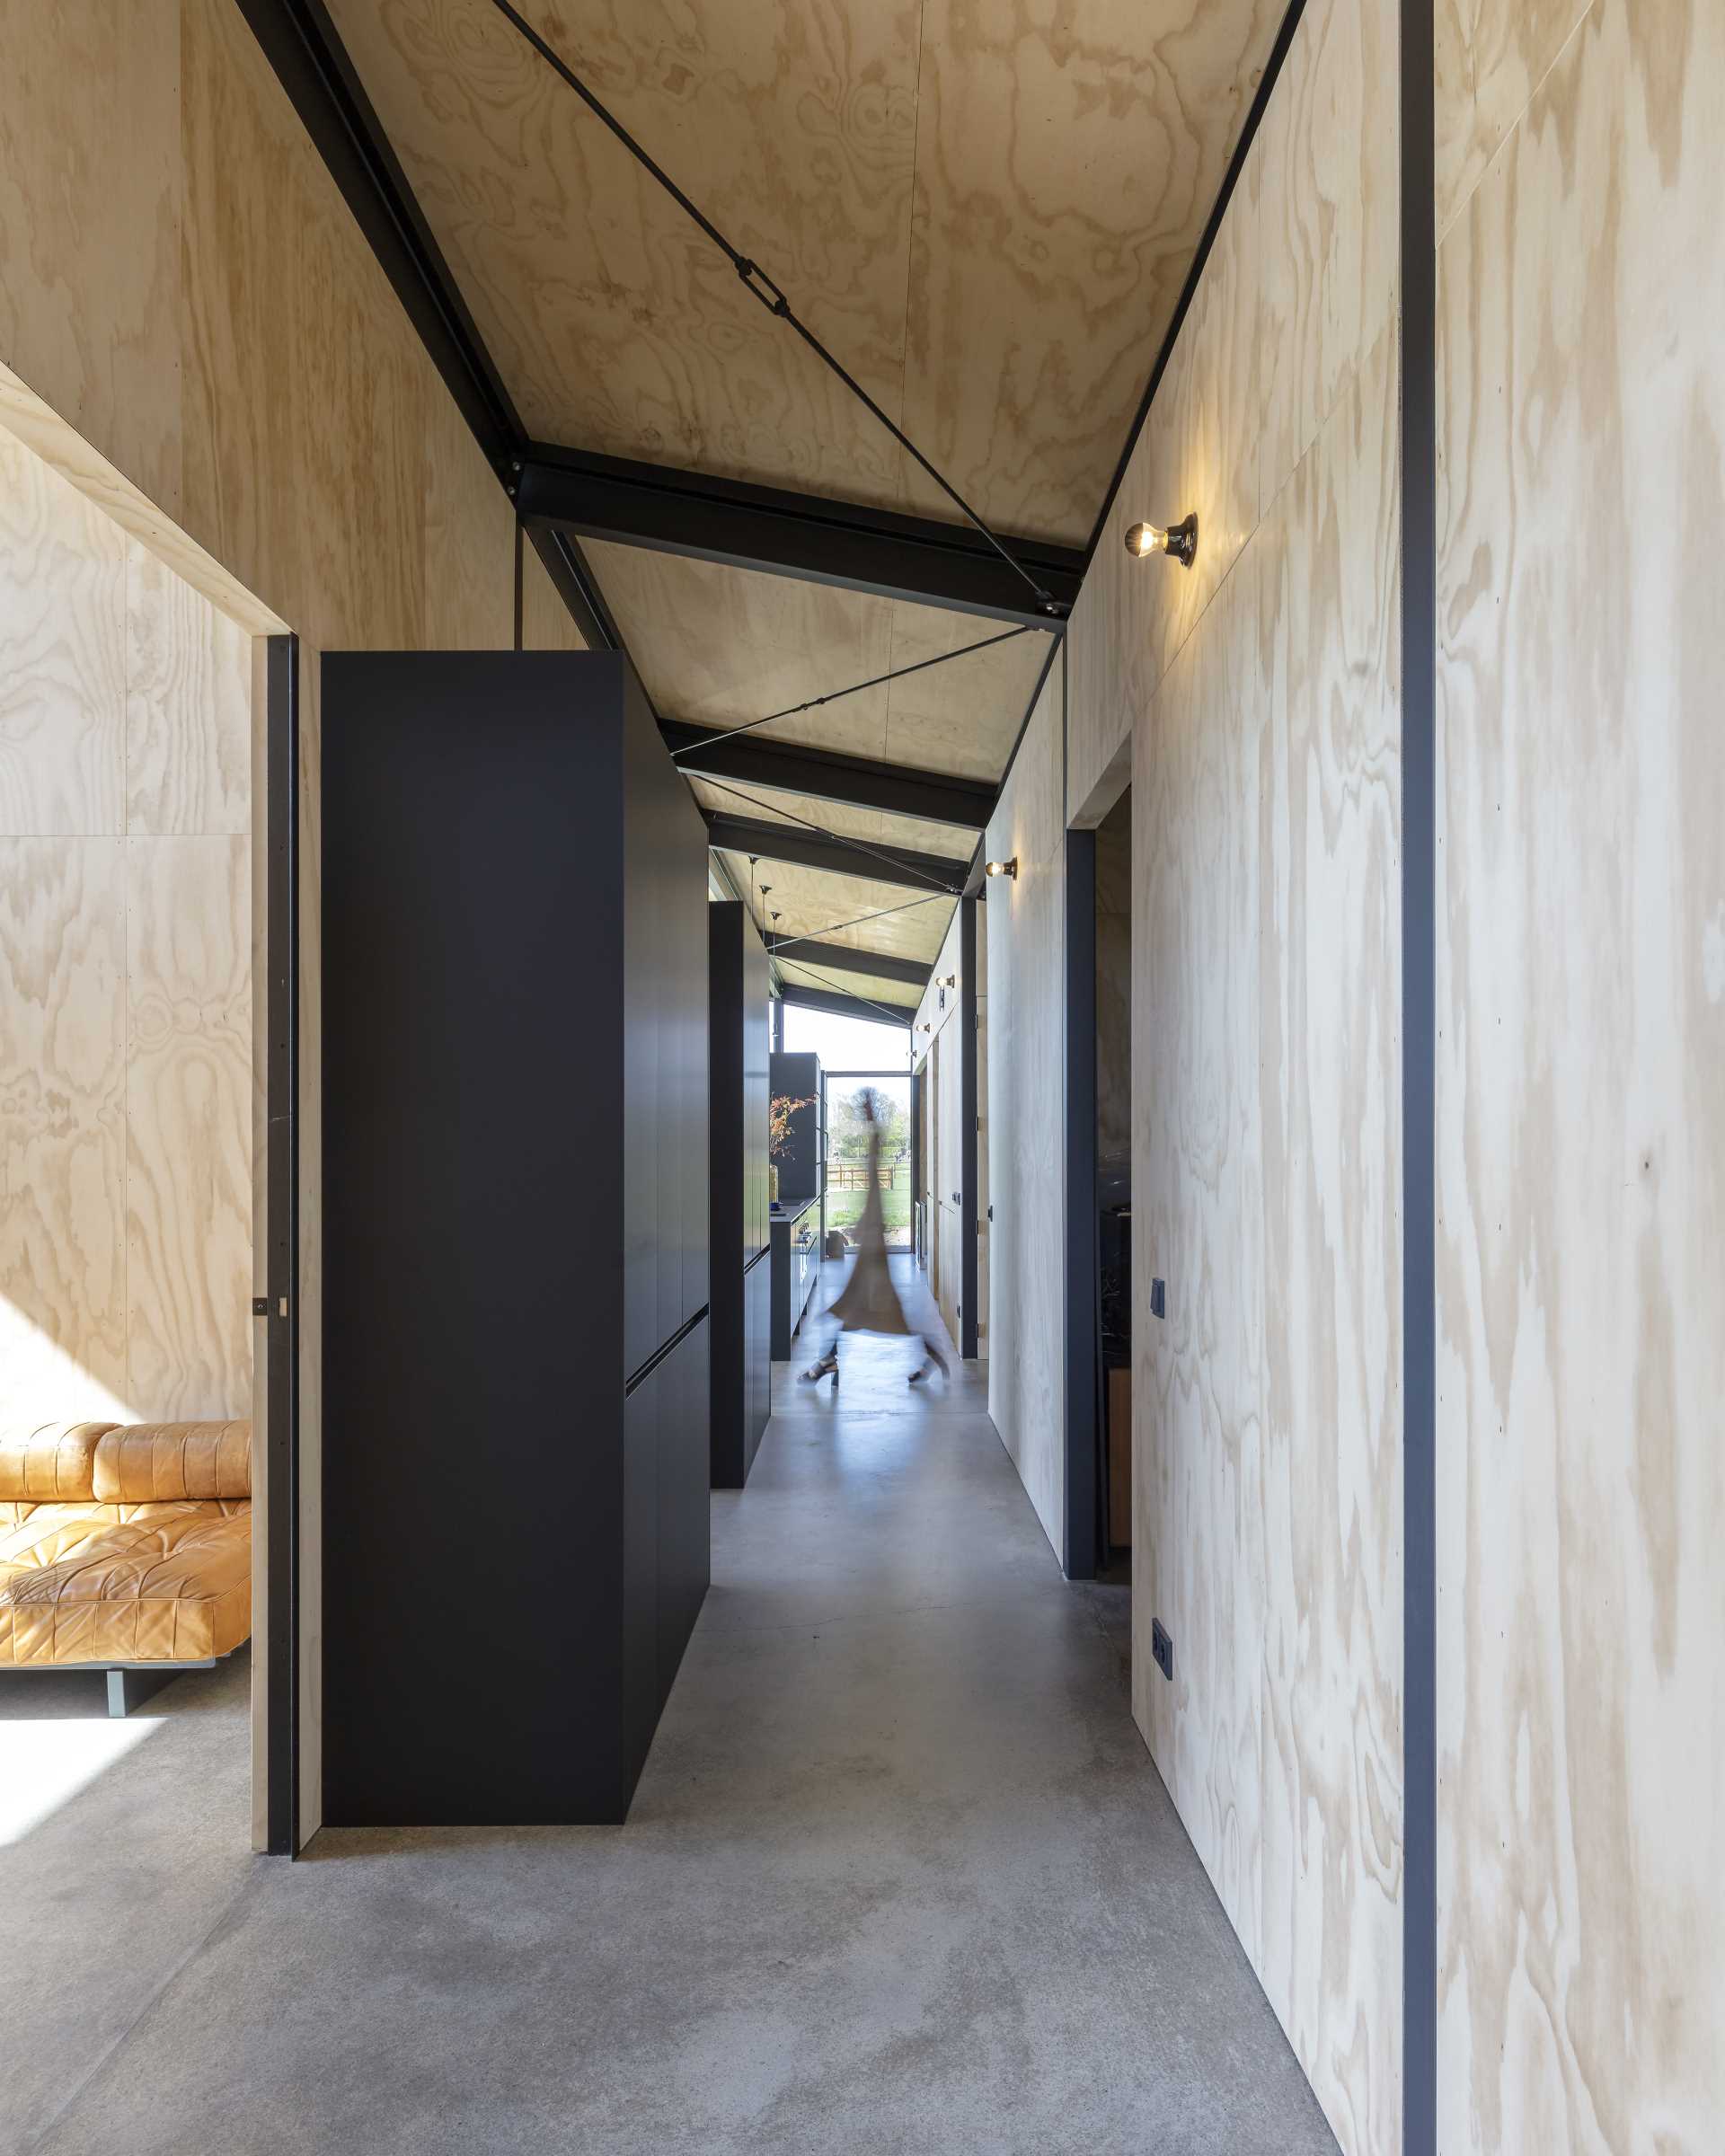 A modern house with a hallway that connects to the kitchen.